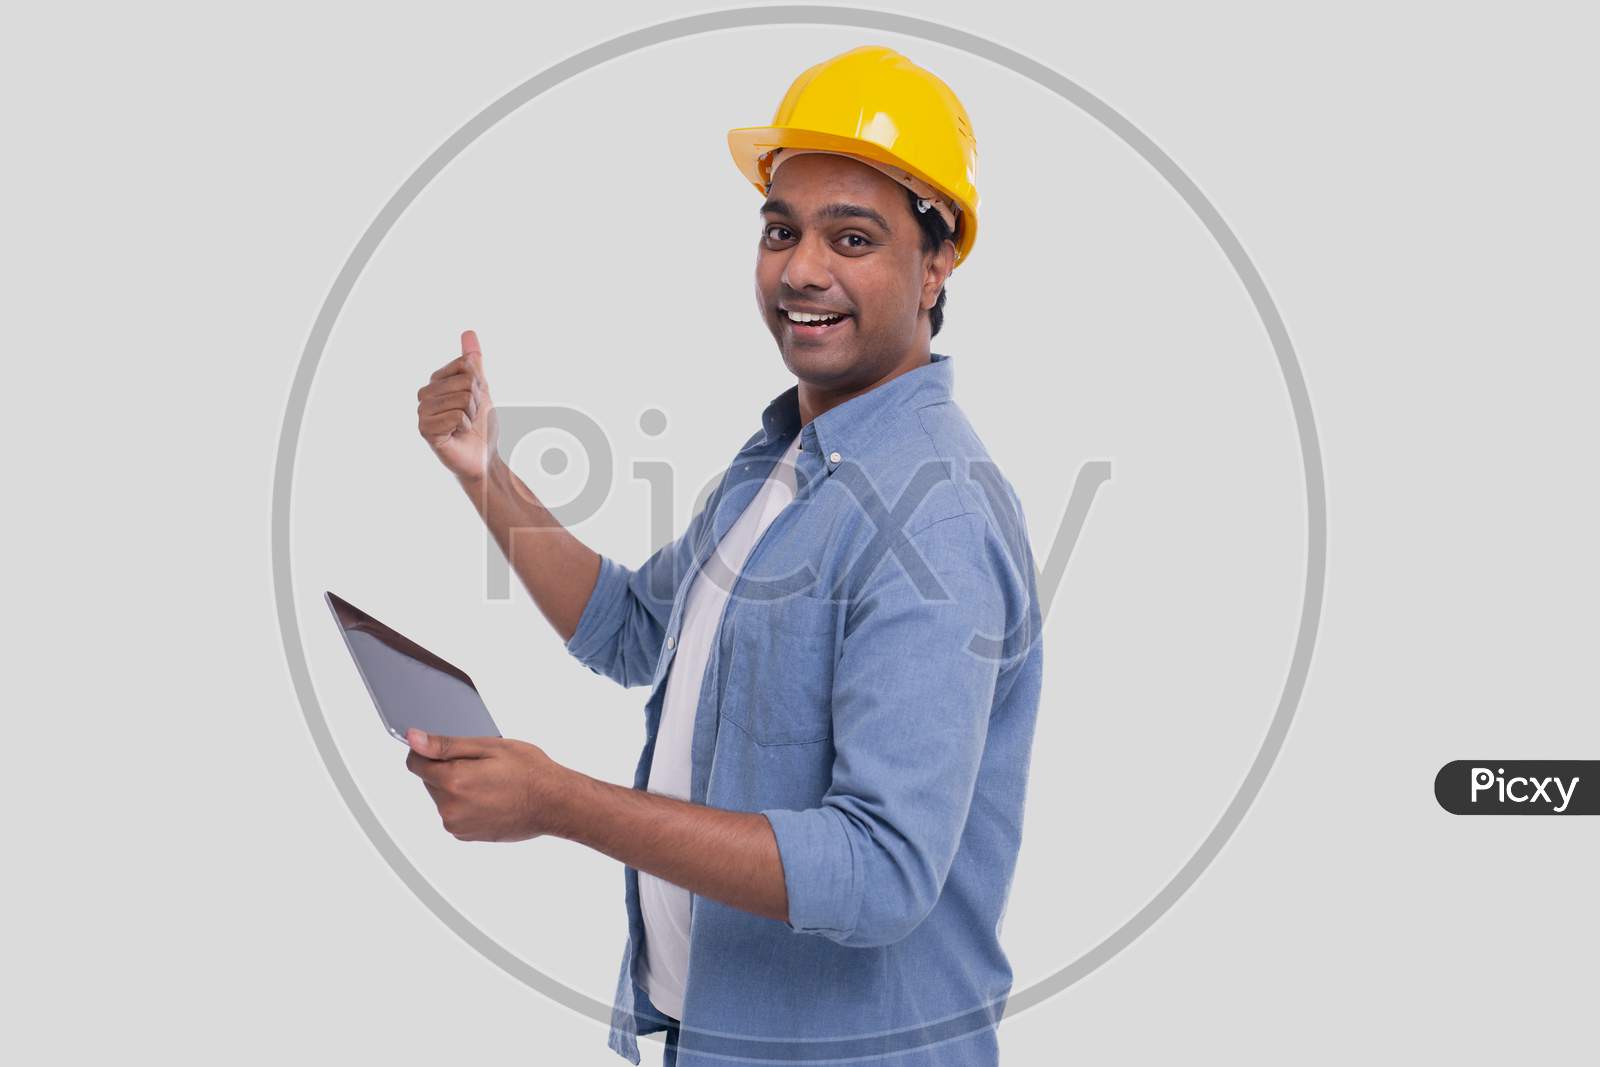 Construction Worker Holding Tablet In Hands Showing Back. Man Using Tablet. Architect Holding Tablet. Yellow Hard Helmet. Worker Isolated